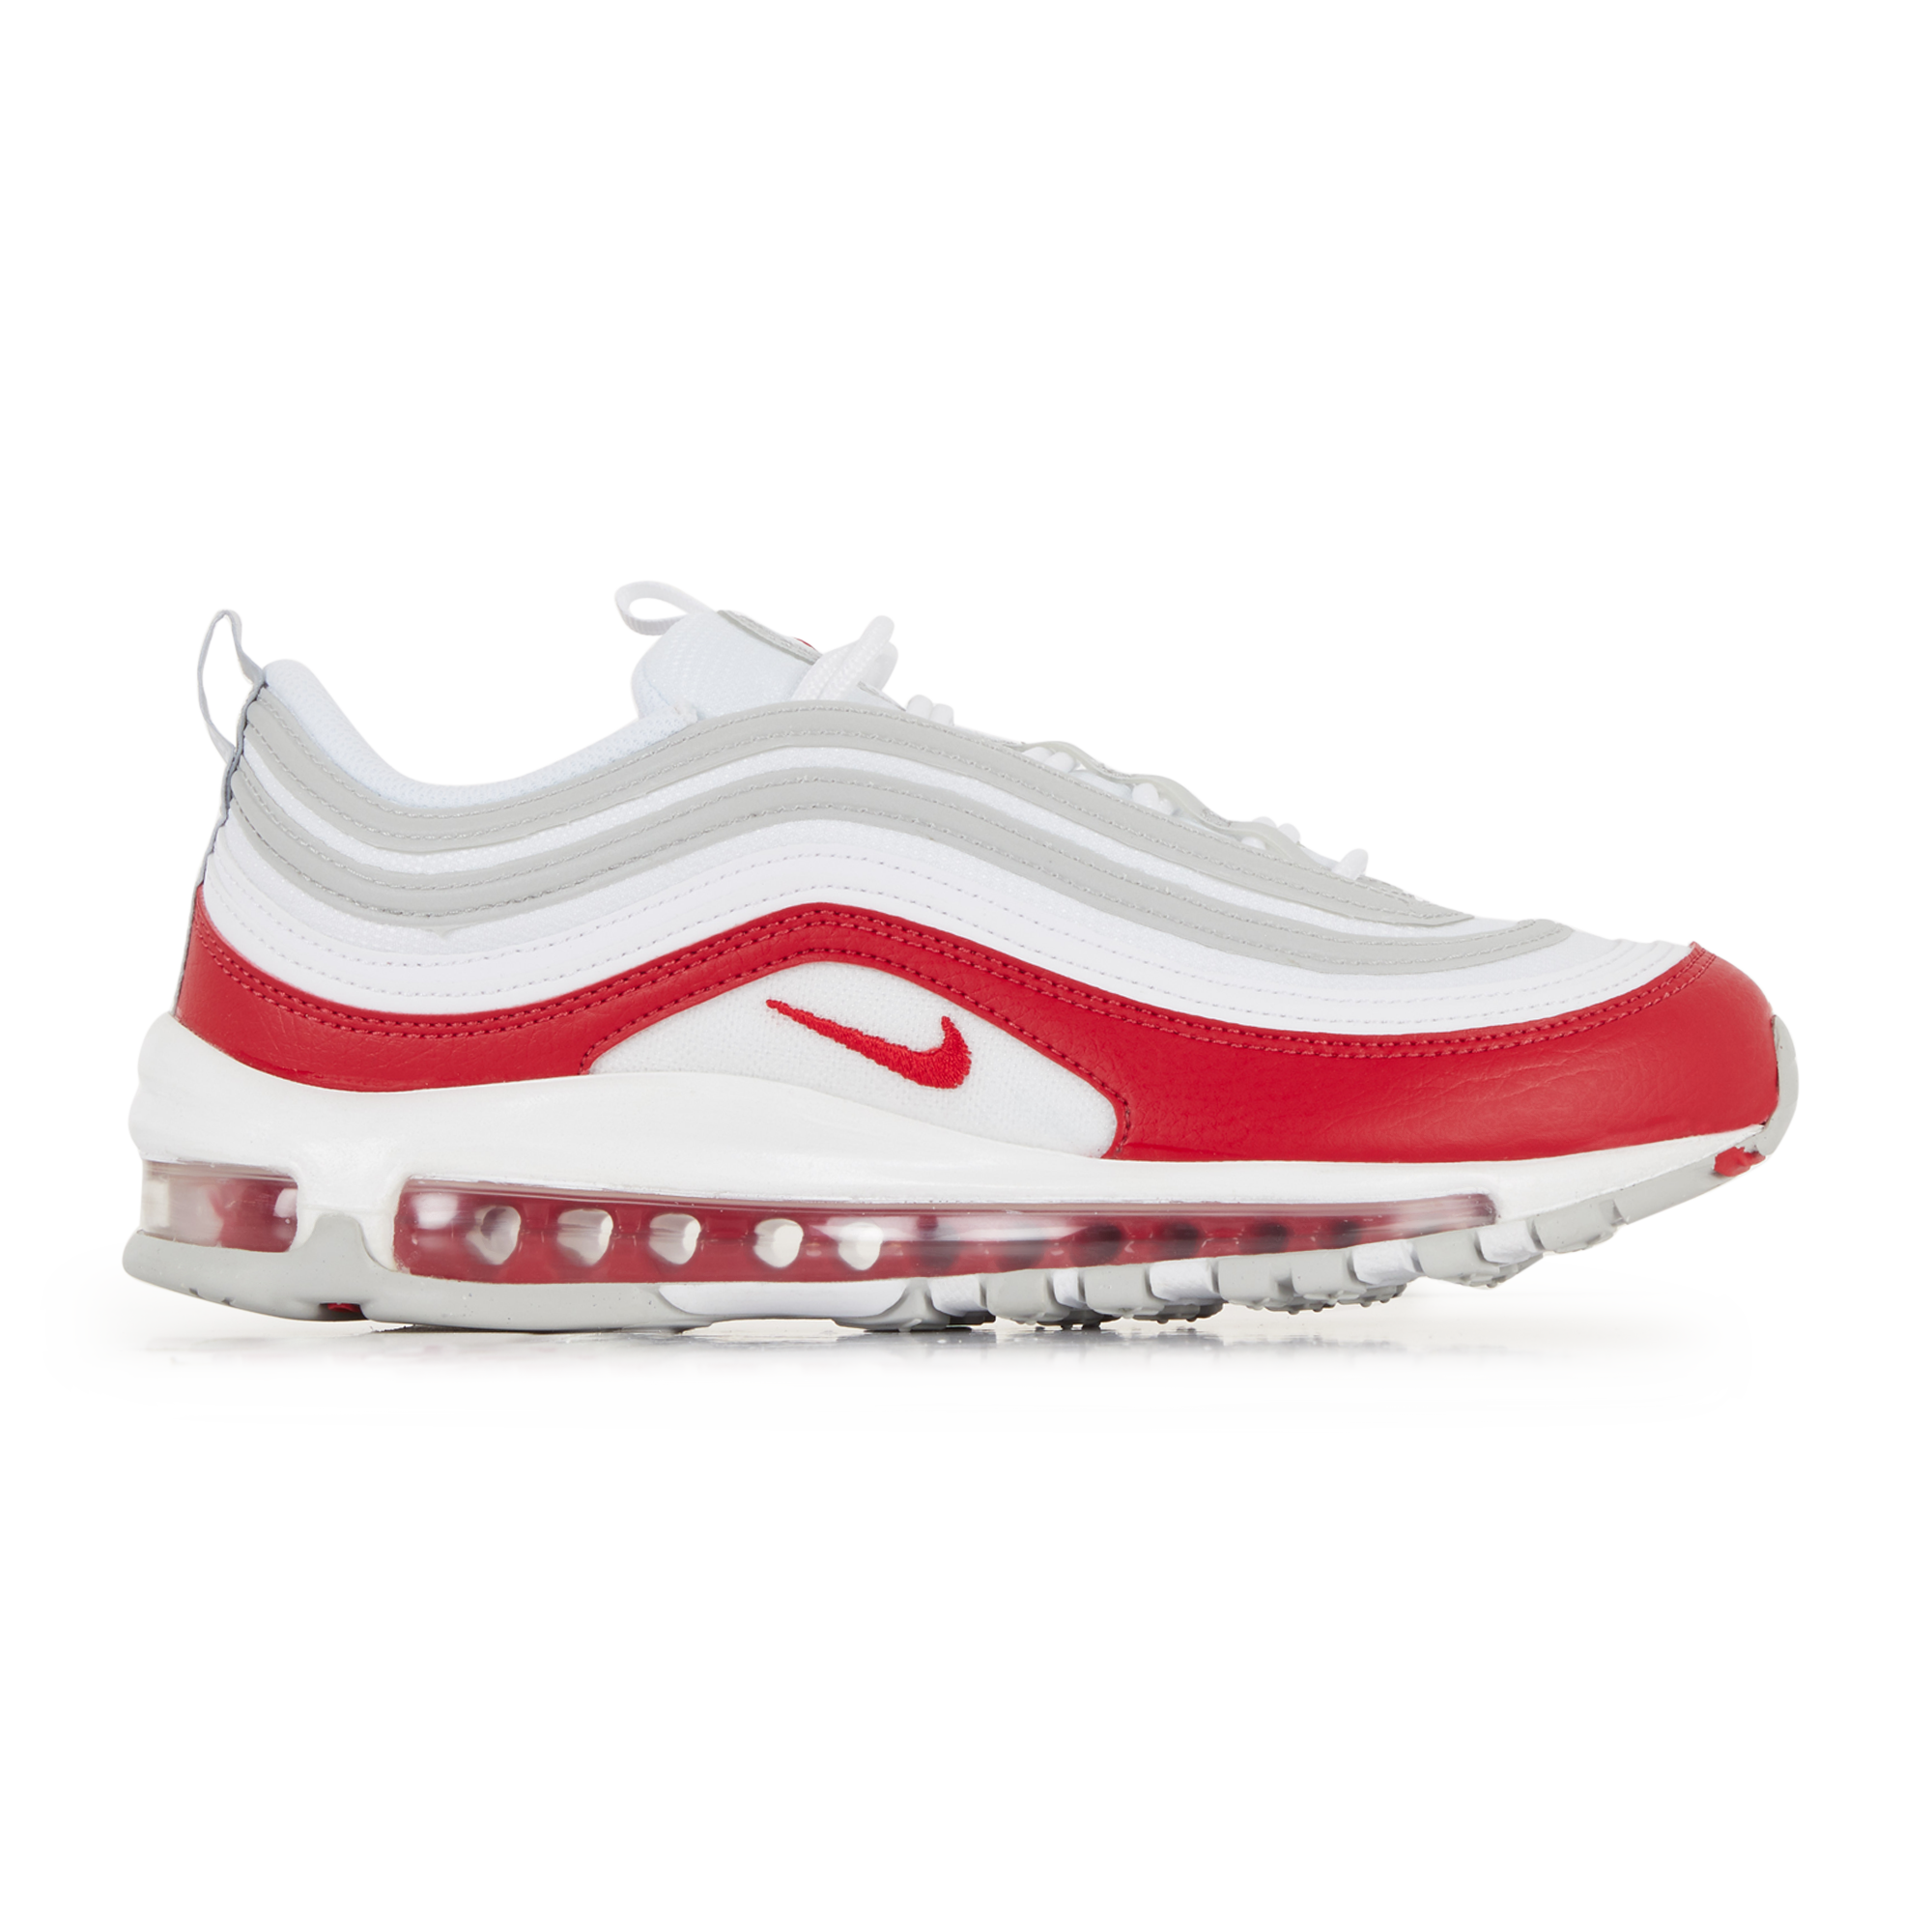 Drank Welkom Productief NIKE AIR MAX 97 WIT/ROOD - SNEAKERS HEREN | Courir.be